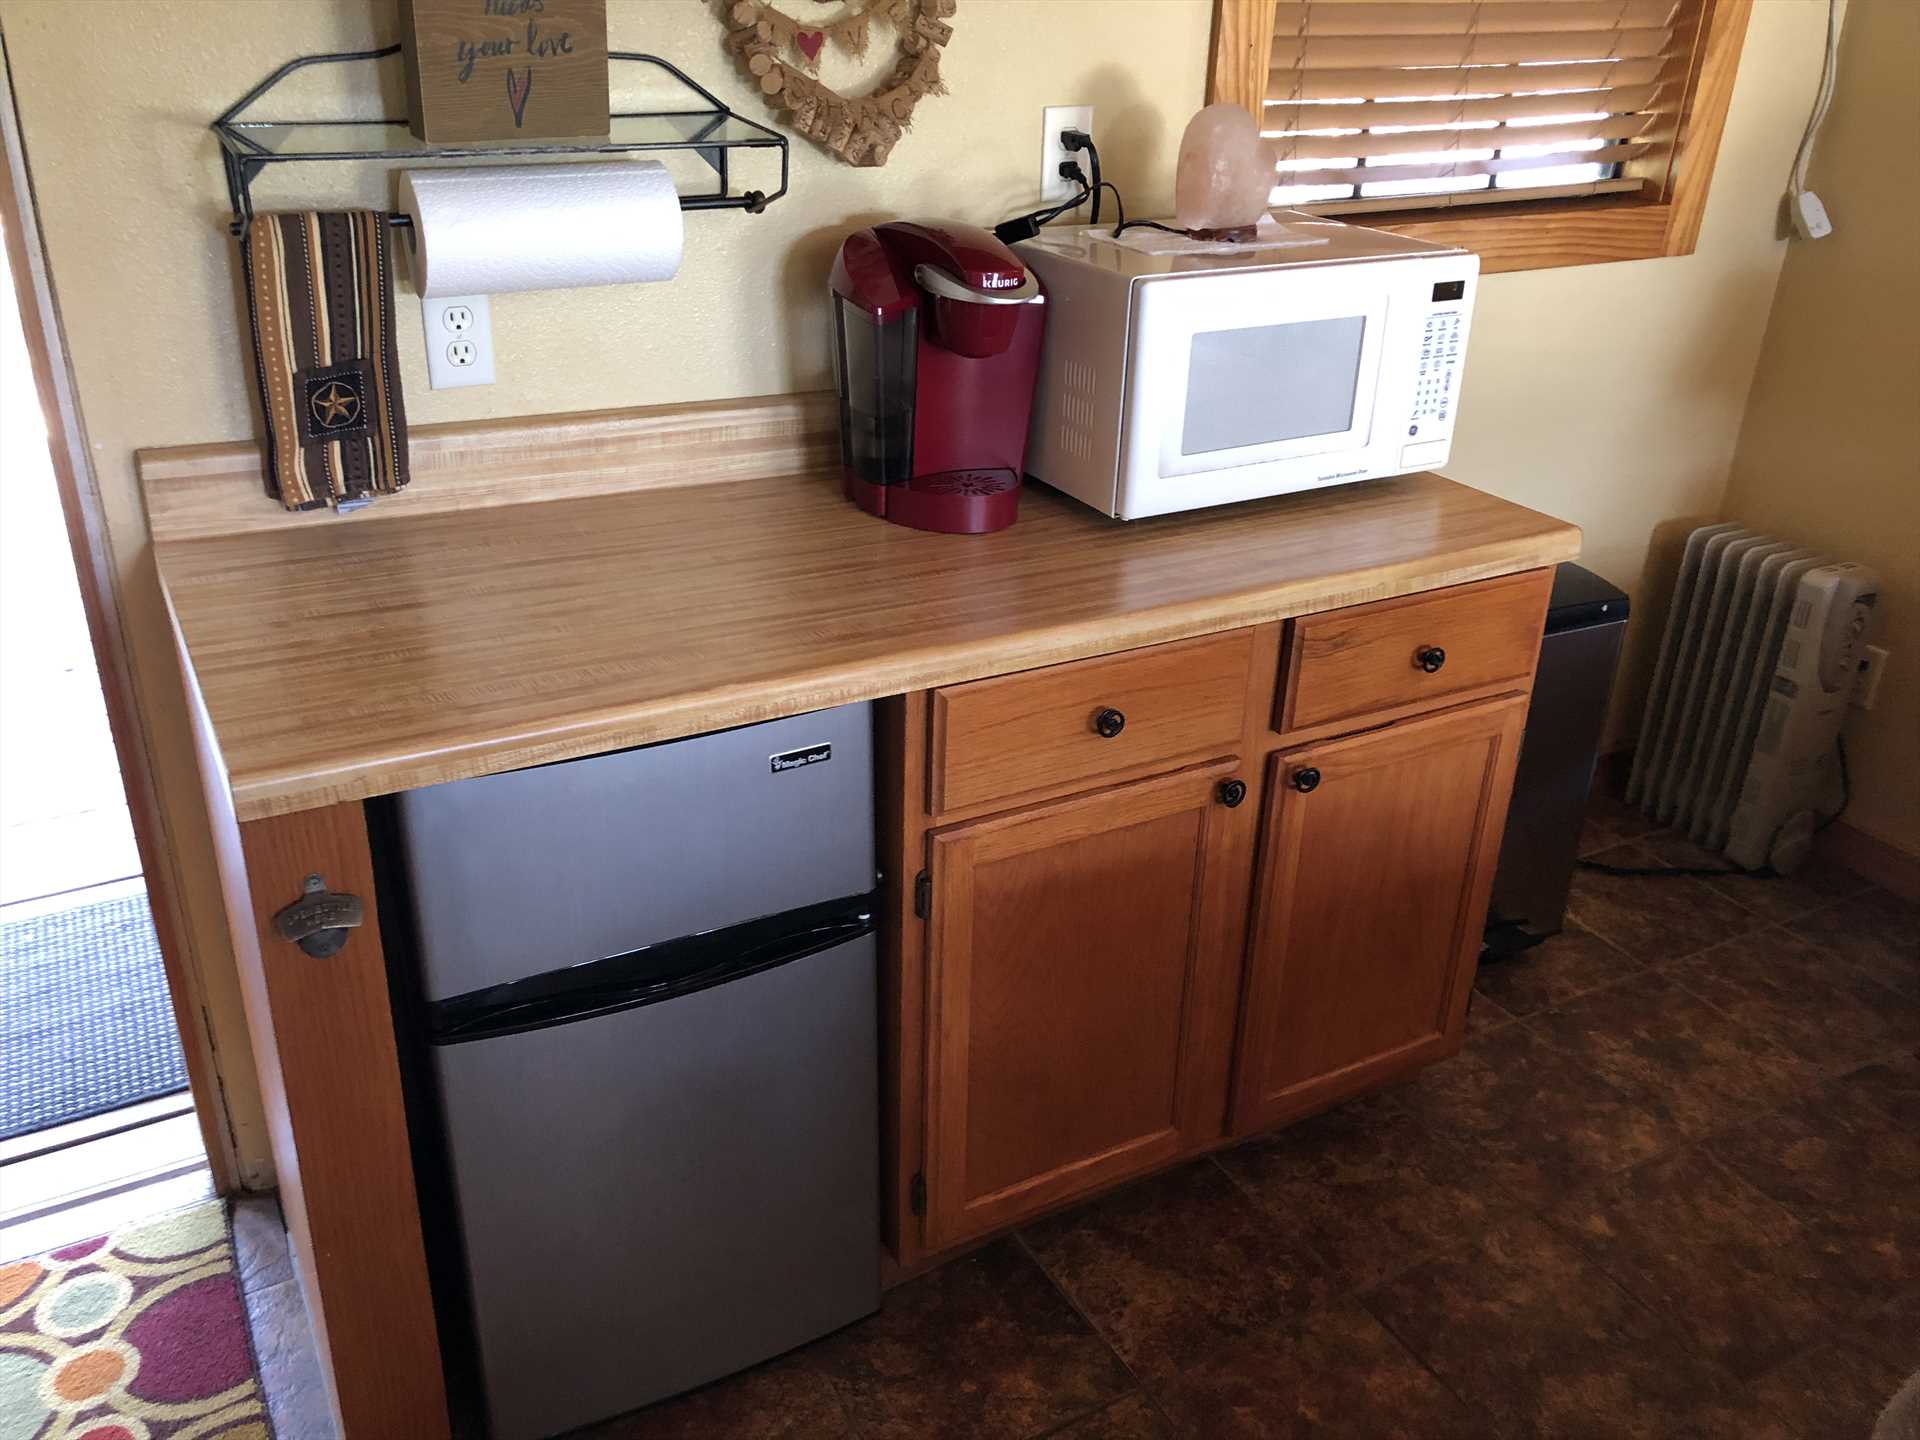                                                 A microwave, coffee maker, and mini fridge can be found in the cozy kitchenette. Keep in mind Bandera, Boerne, and Pipe Creek are all close by!